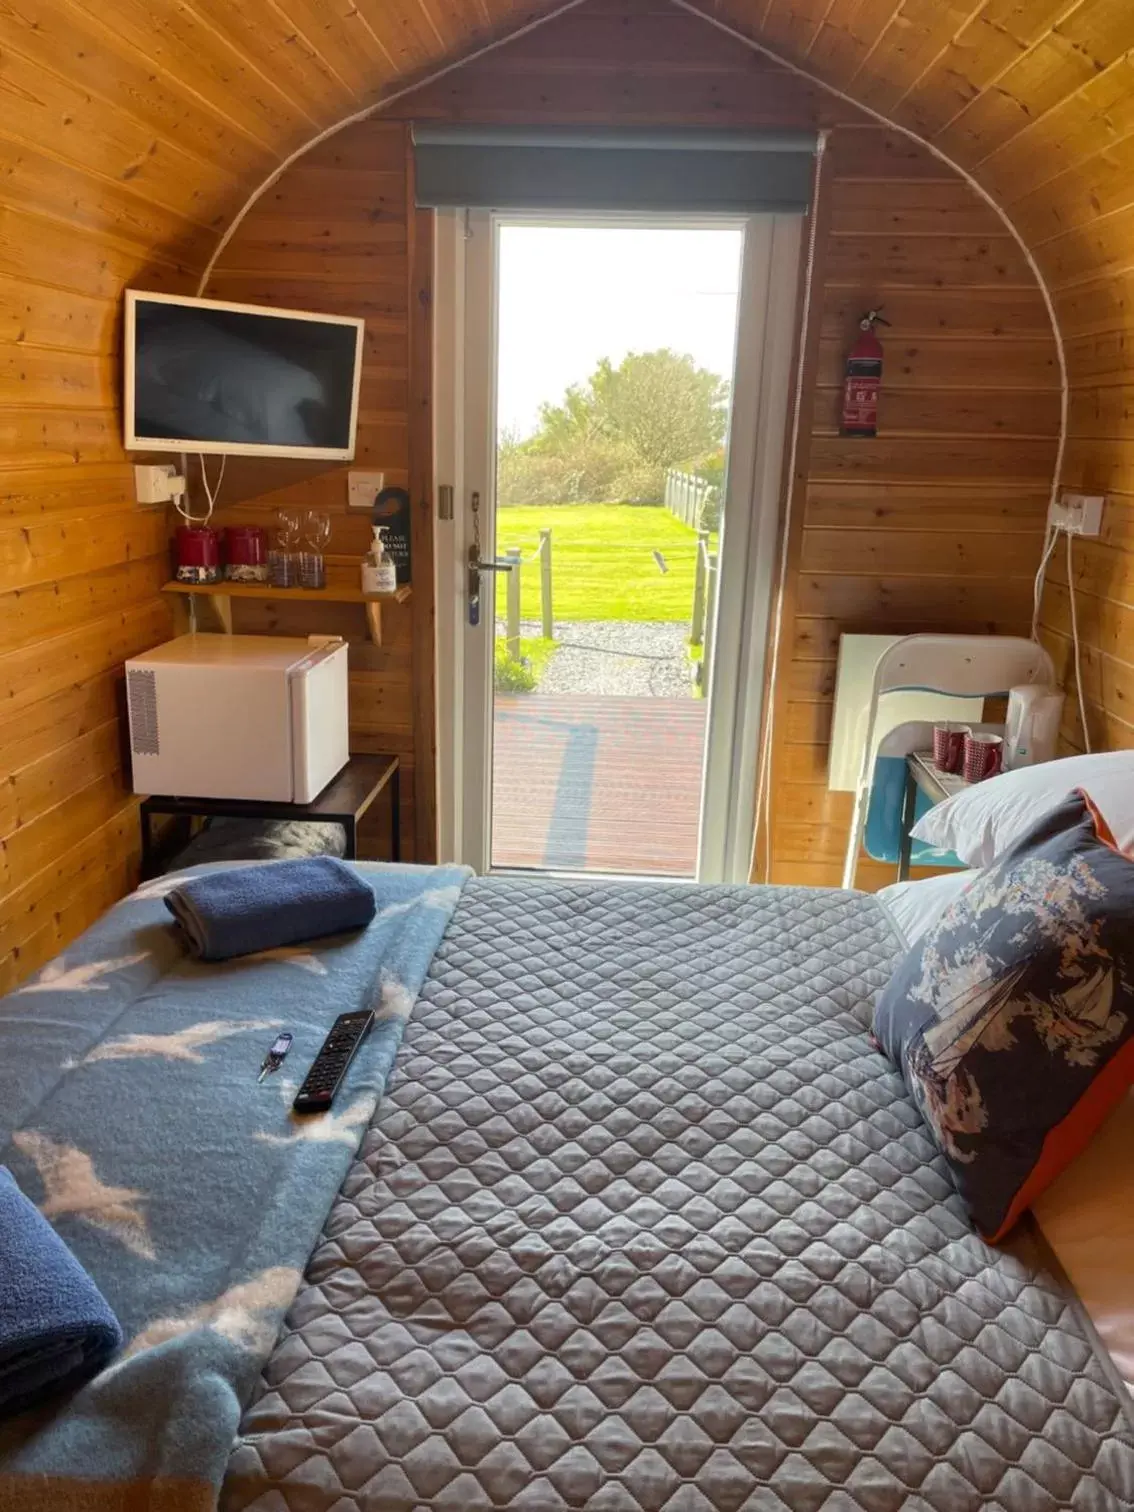 Bed in Sea and Mountain View Luxury Glamping Pods Heated